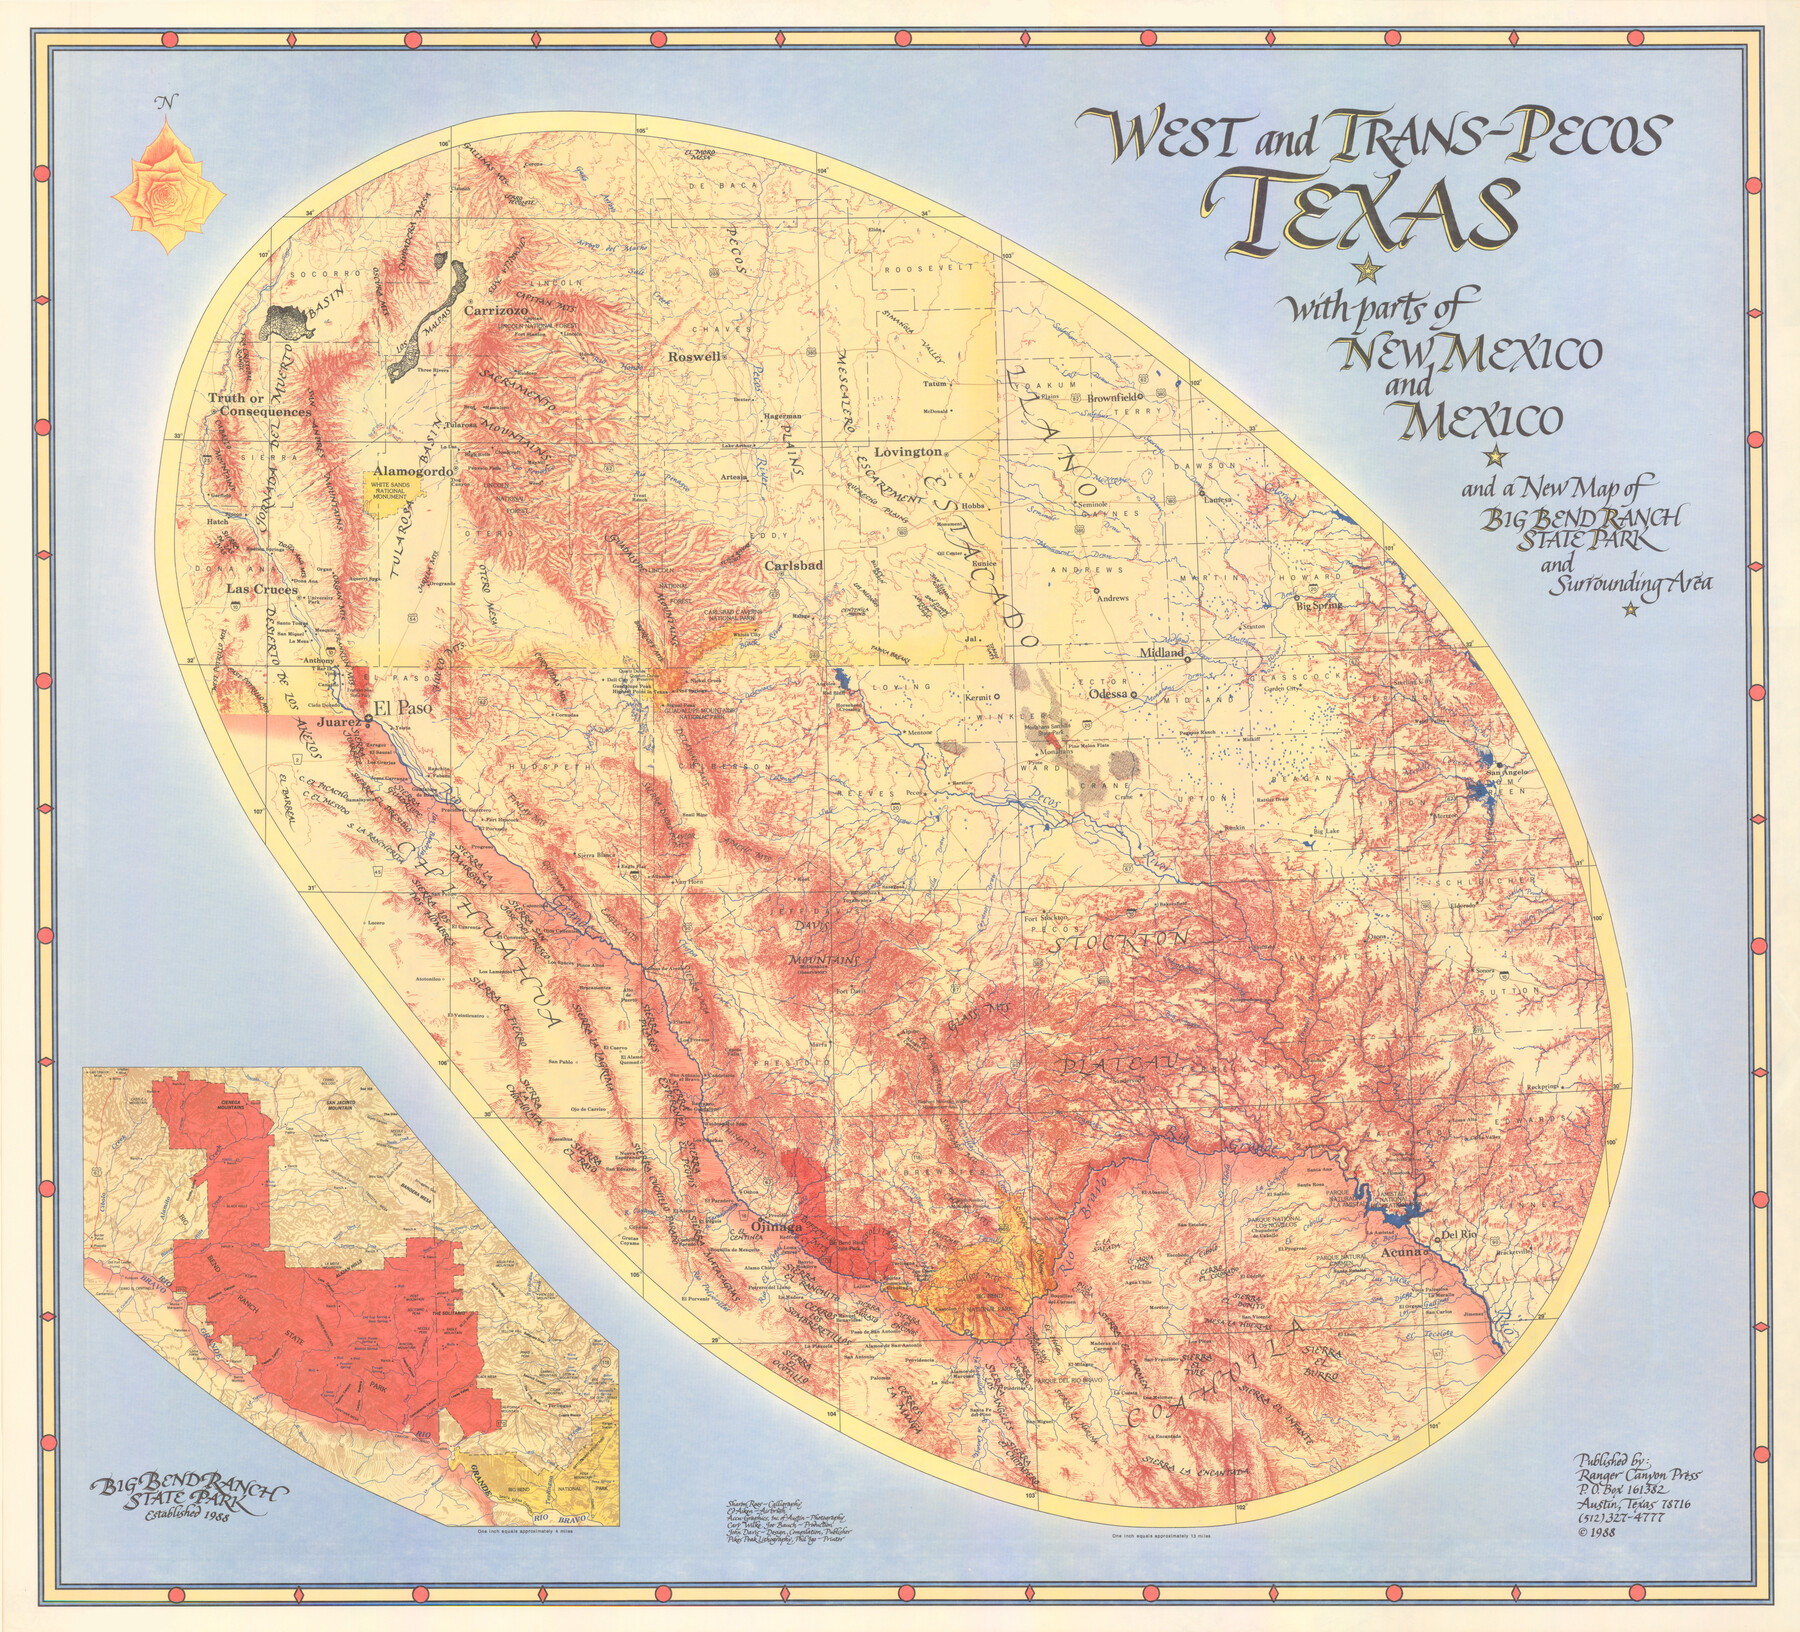 89070, West and Trans-Pecos Texas with parts of New Mexico and Mexico and a New Map of Big Bend Ranch State Park and Surrounding Area, General Map Collection